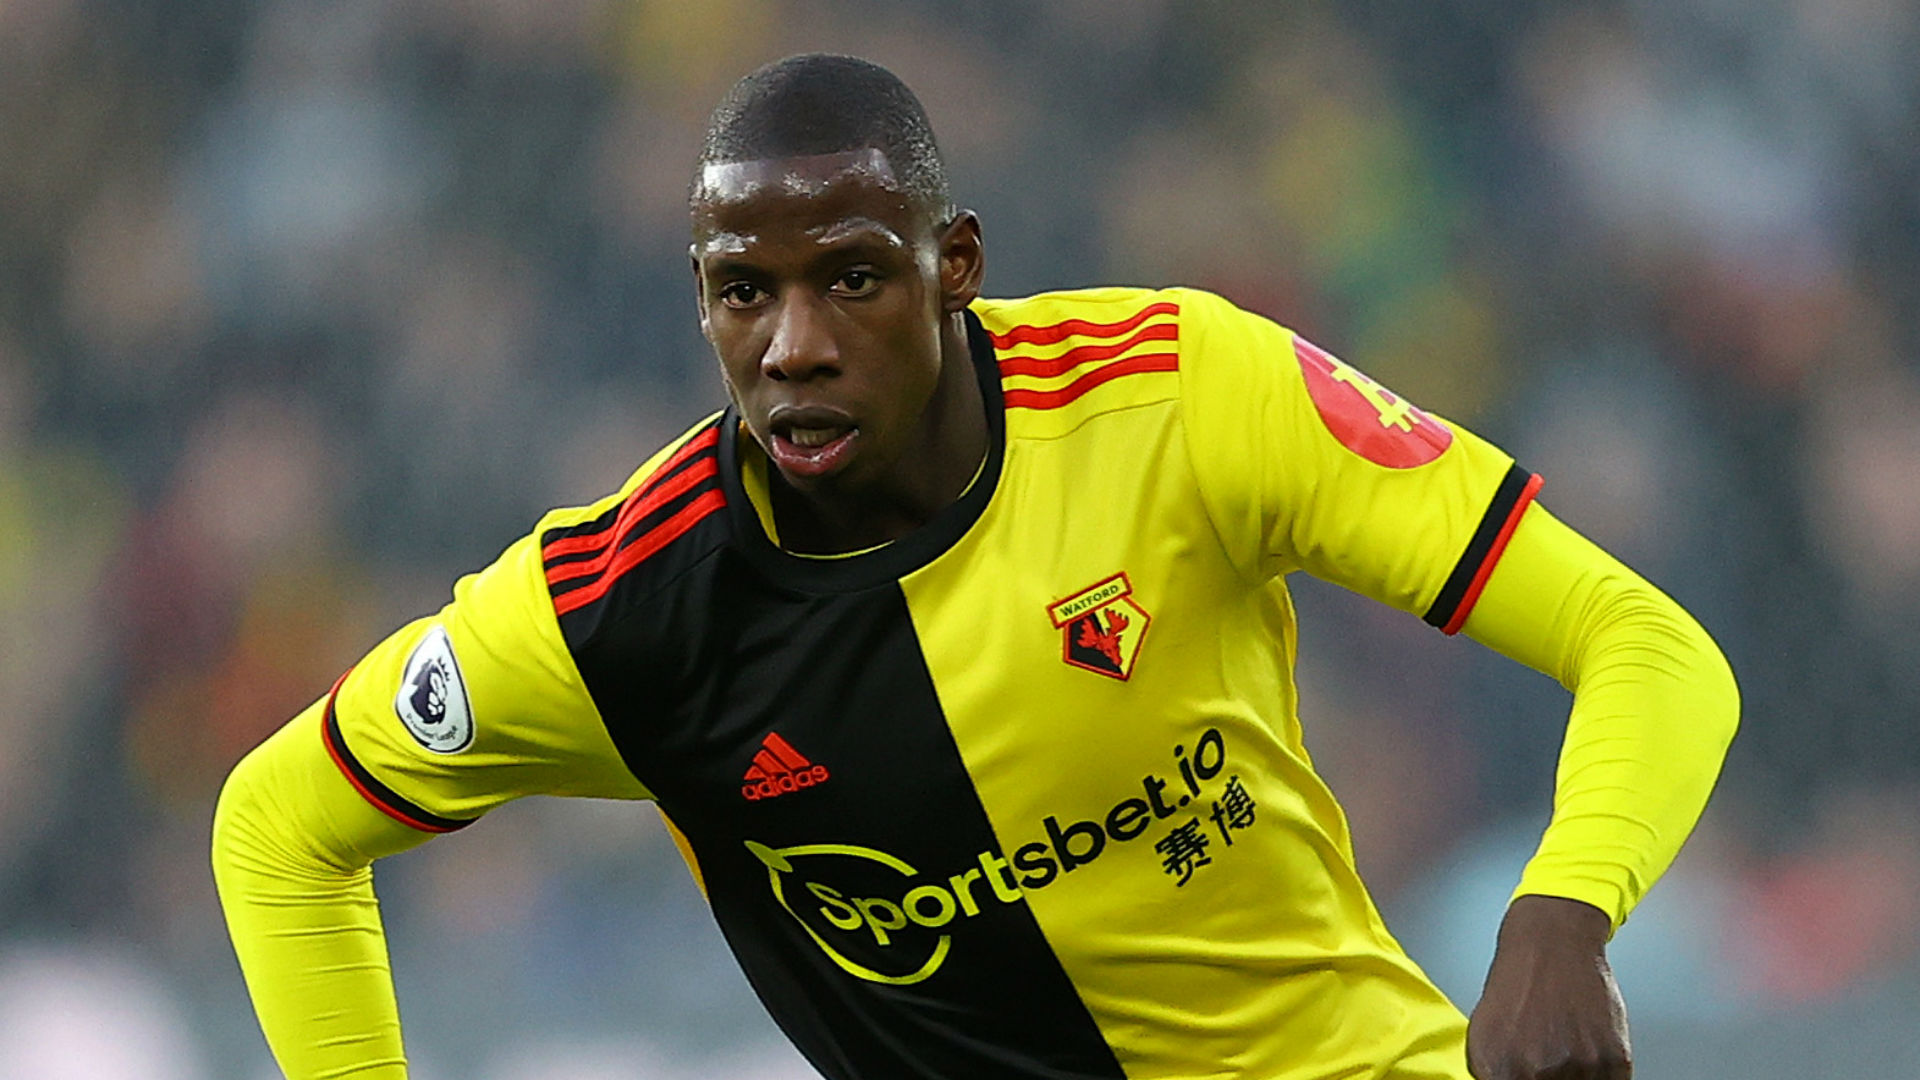 Doucoure becomes latest Everton signing in £20m deal